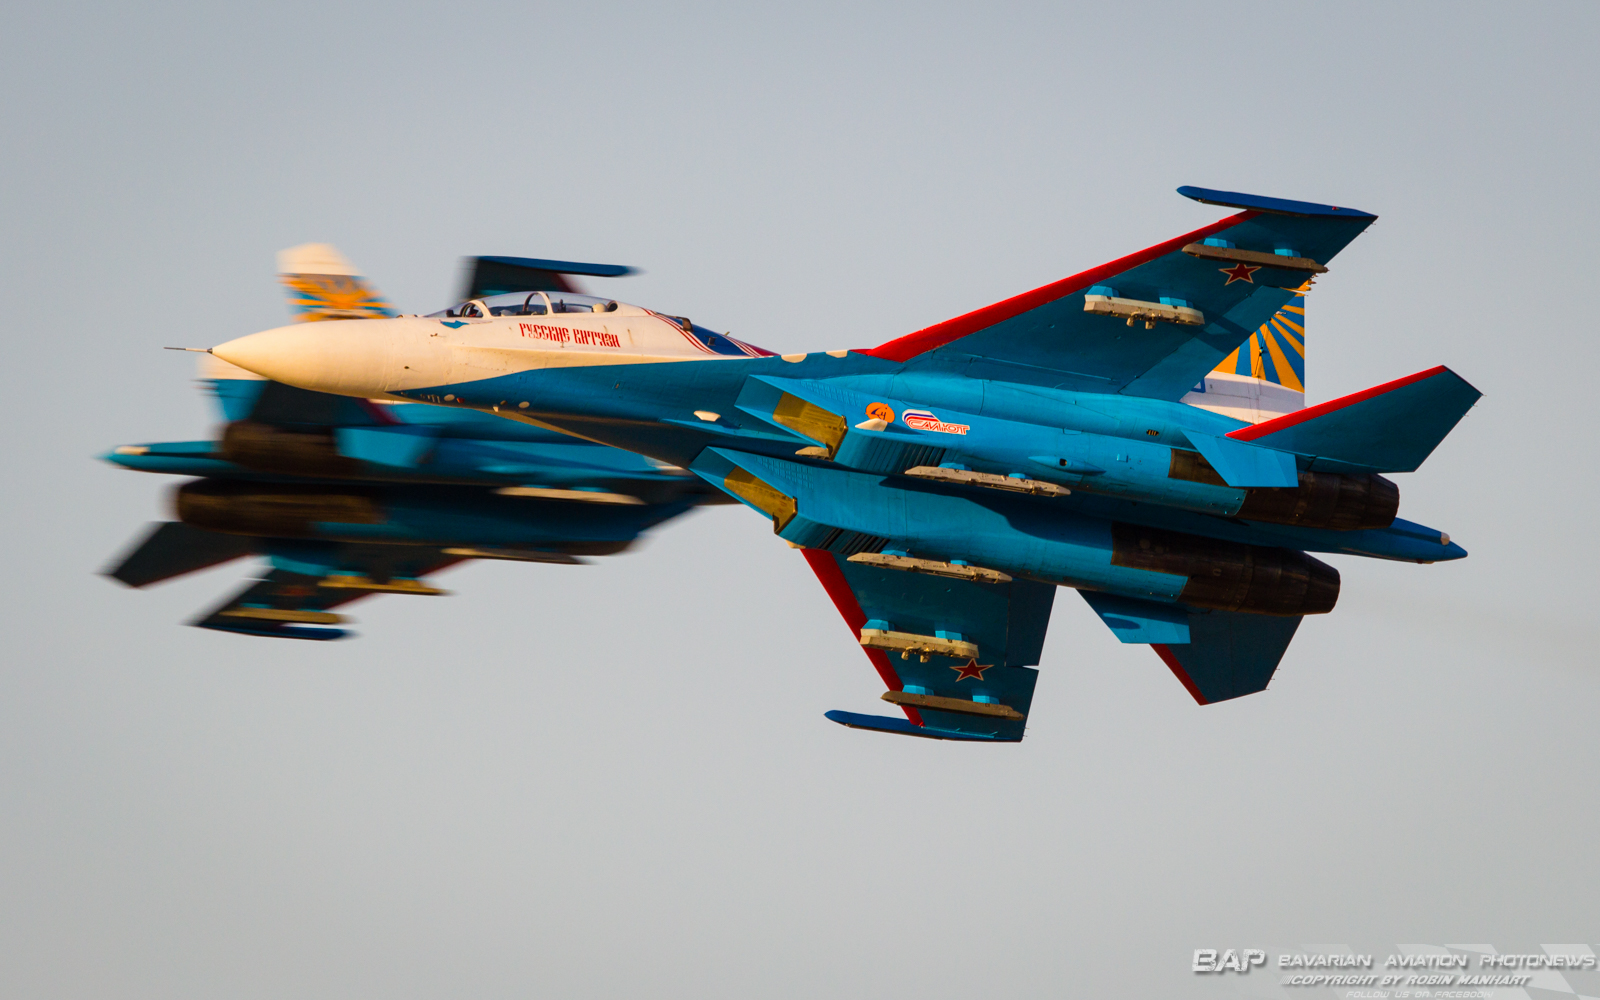 Mighty "Flanker's" of the Russian Knights